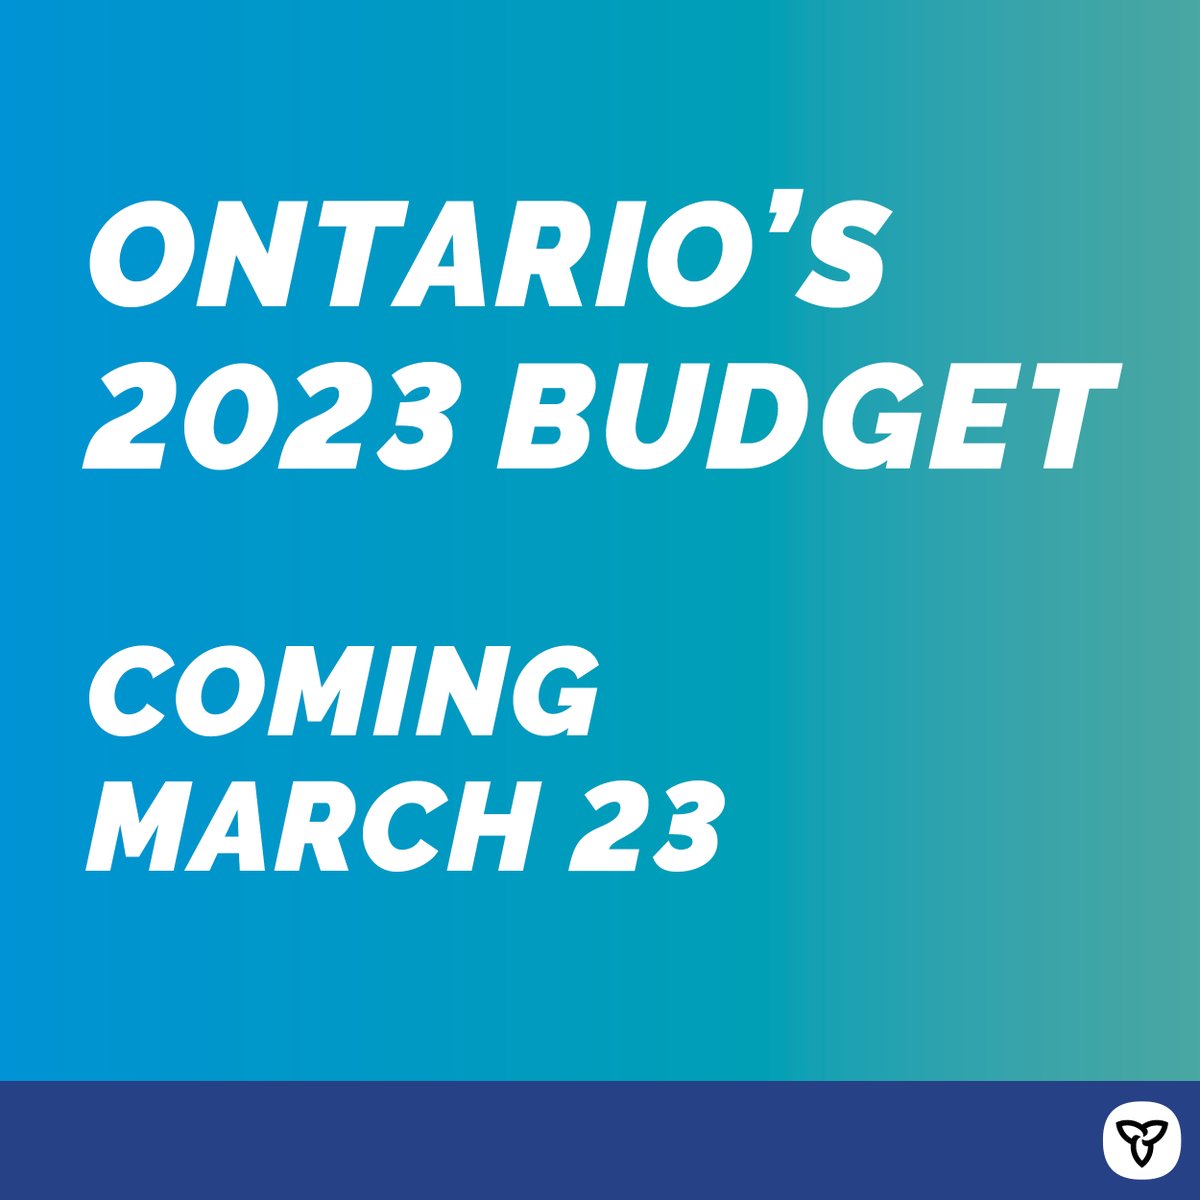 Have you heard? On March 23, the government will release Ontario’s 2023 Budget and share its plan to build a strong future for Ontario. #ONBudget2023